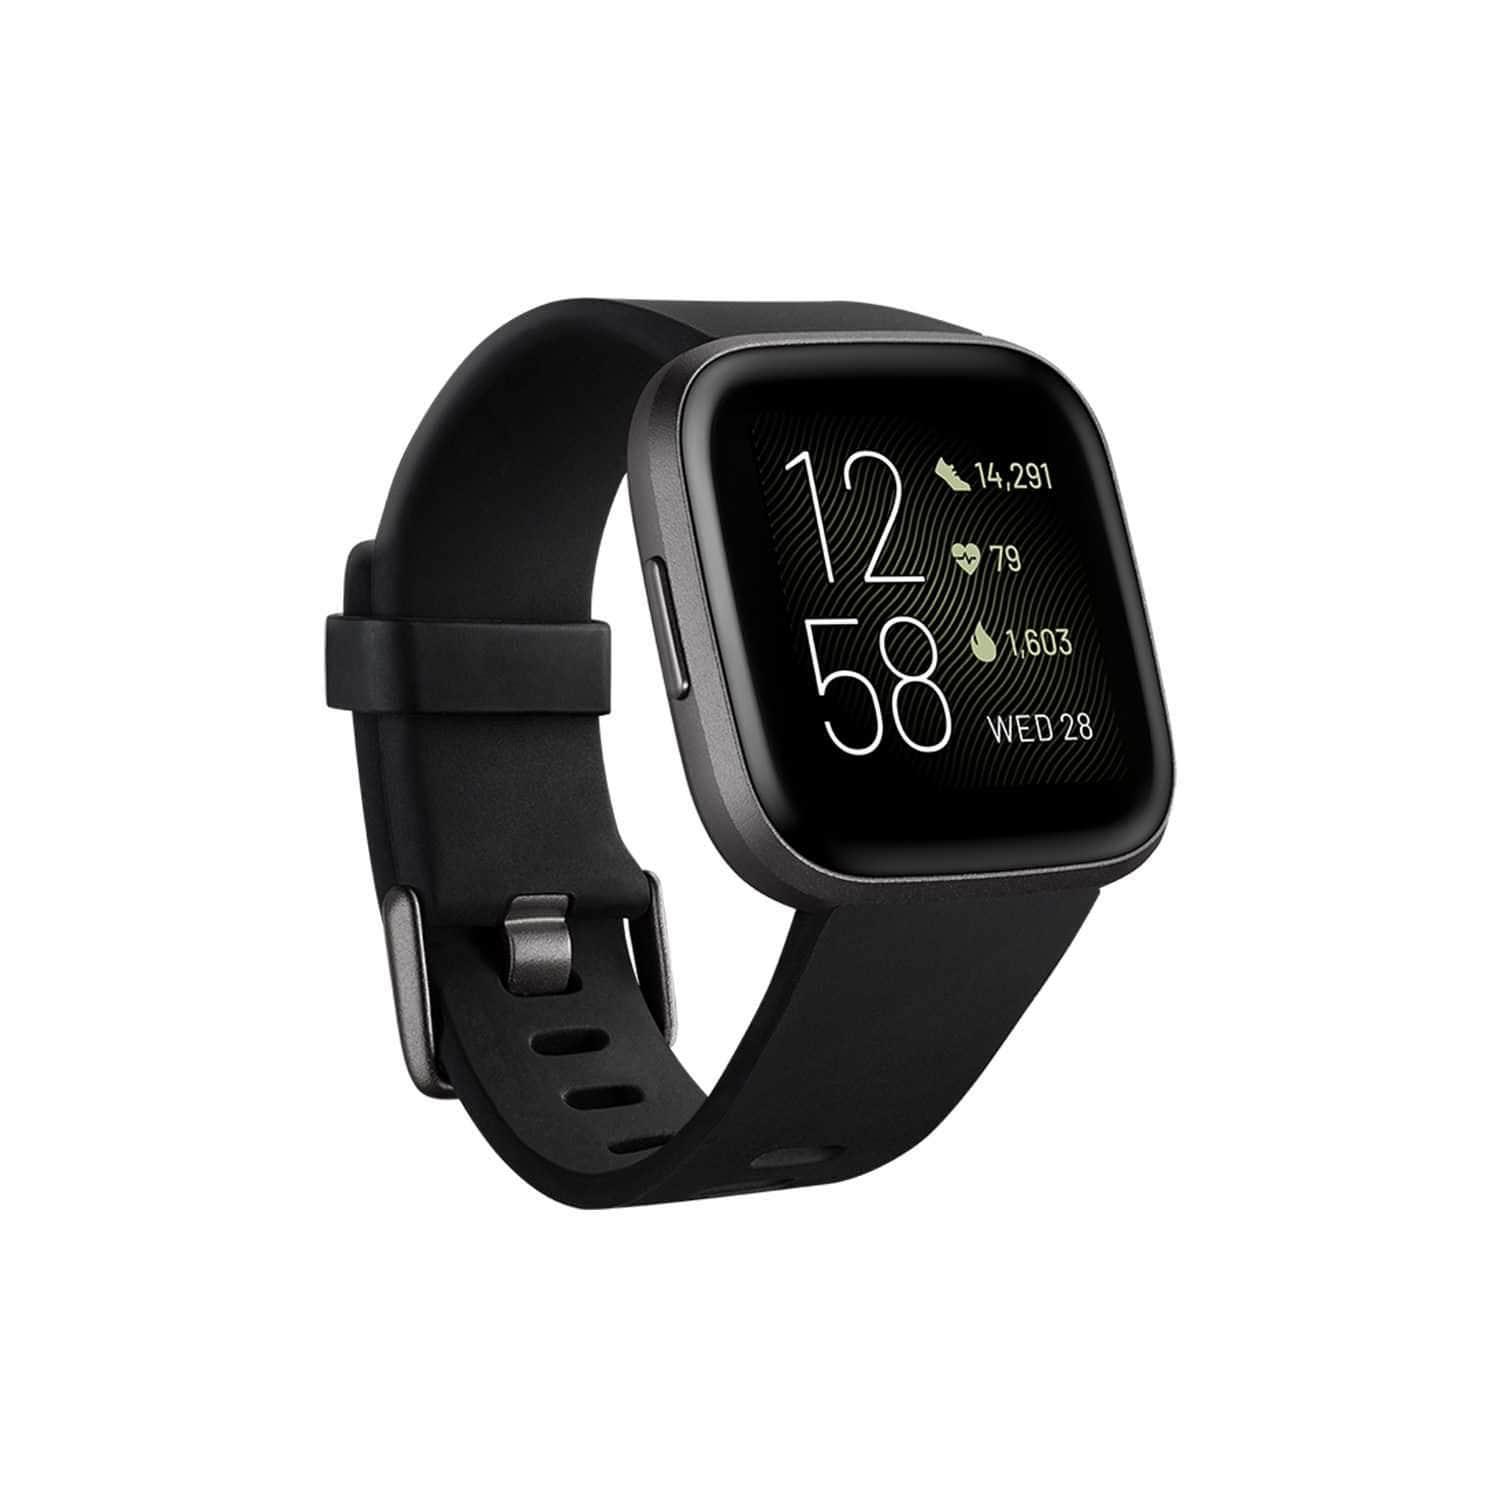 fitbit versa 2 fitness wristband with heart rate tracker black